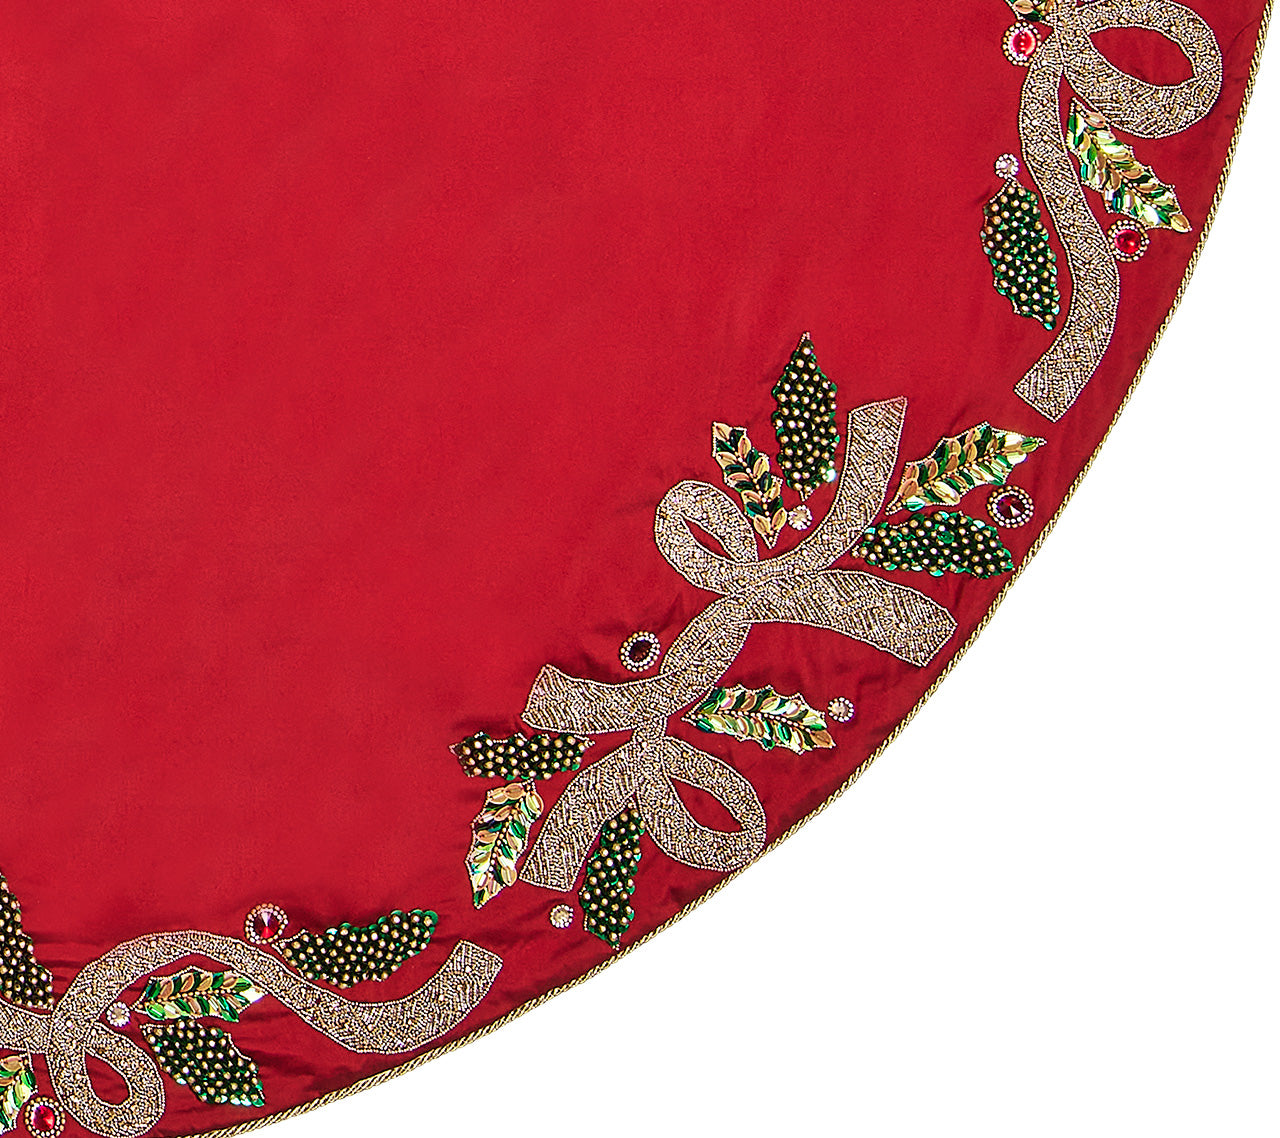 Tidings Tree Skirt in Red, Green & Gold